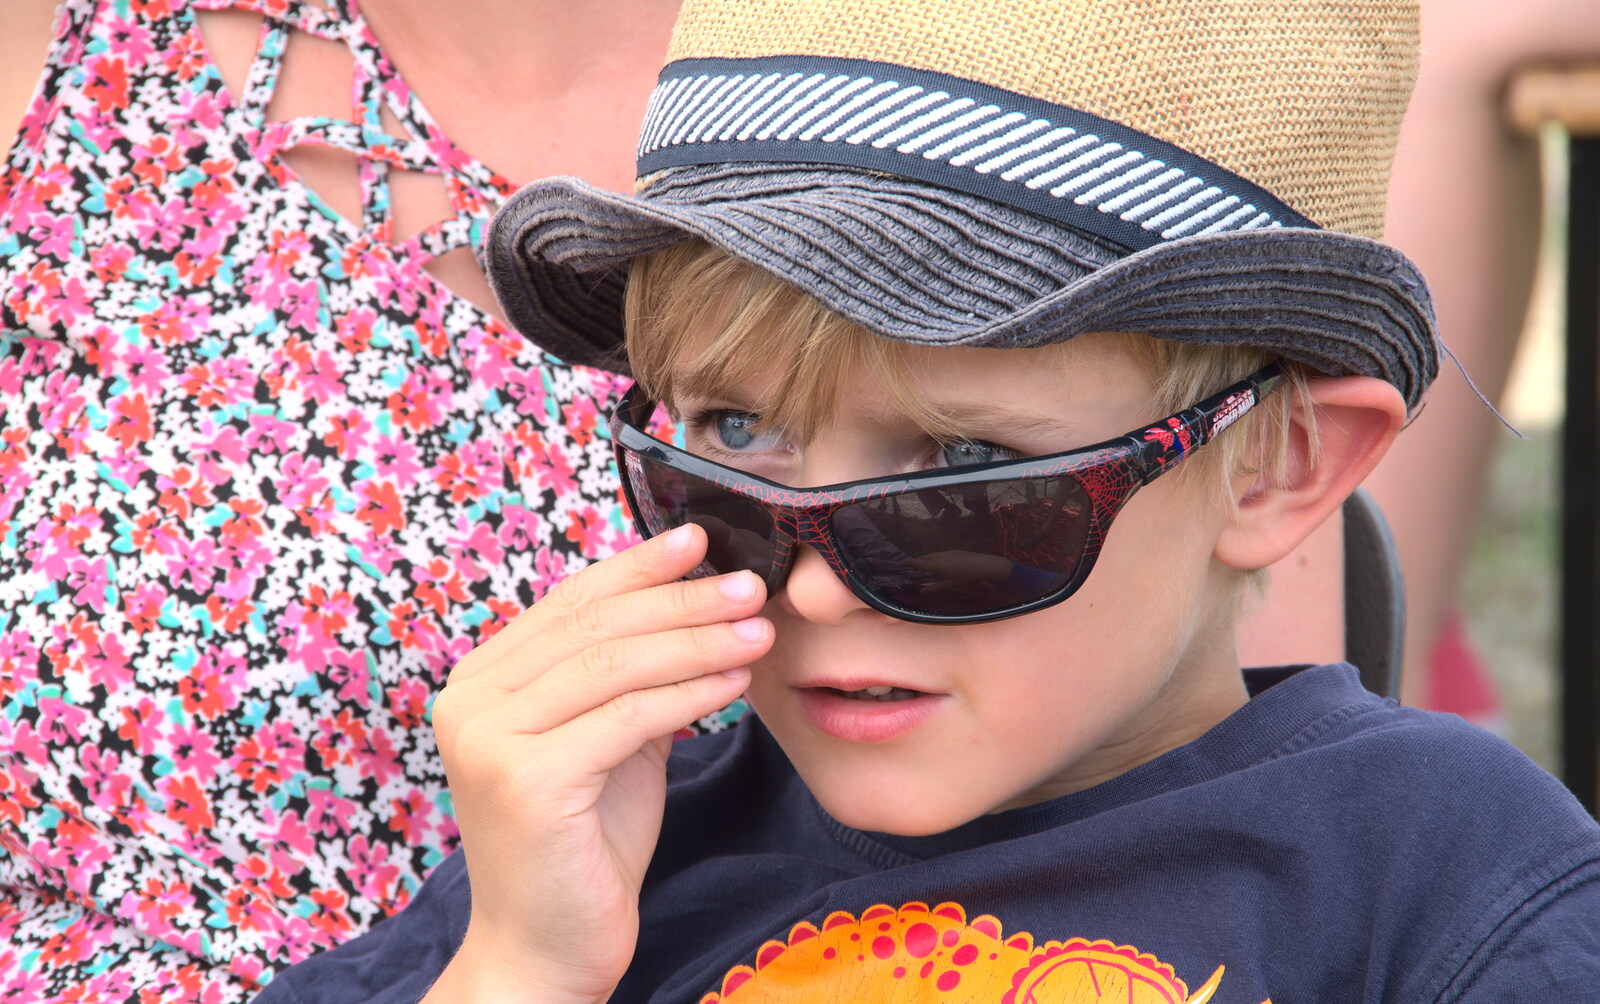 Harry looks over his shades from A Village Hog Roast, Little Green, Thrandeston, Suffolk - 24th June 2018